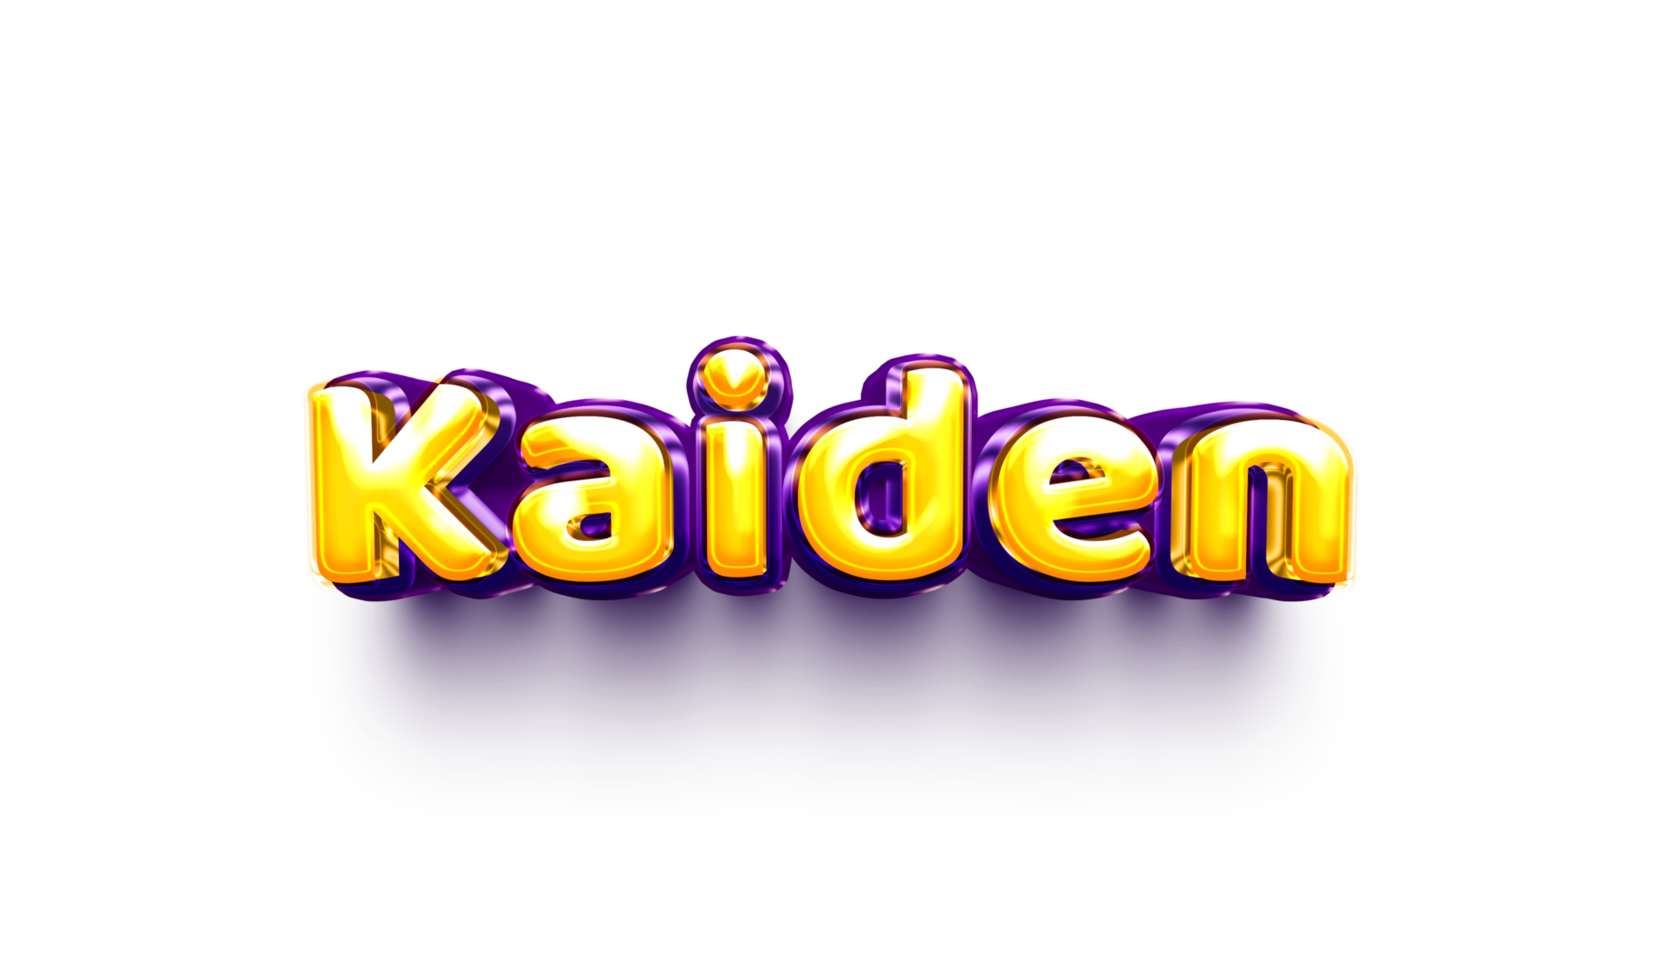 names of boys English helium balloon shiny celebration sticker 3d inflated Kaiden png